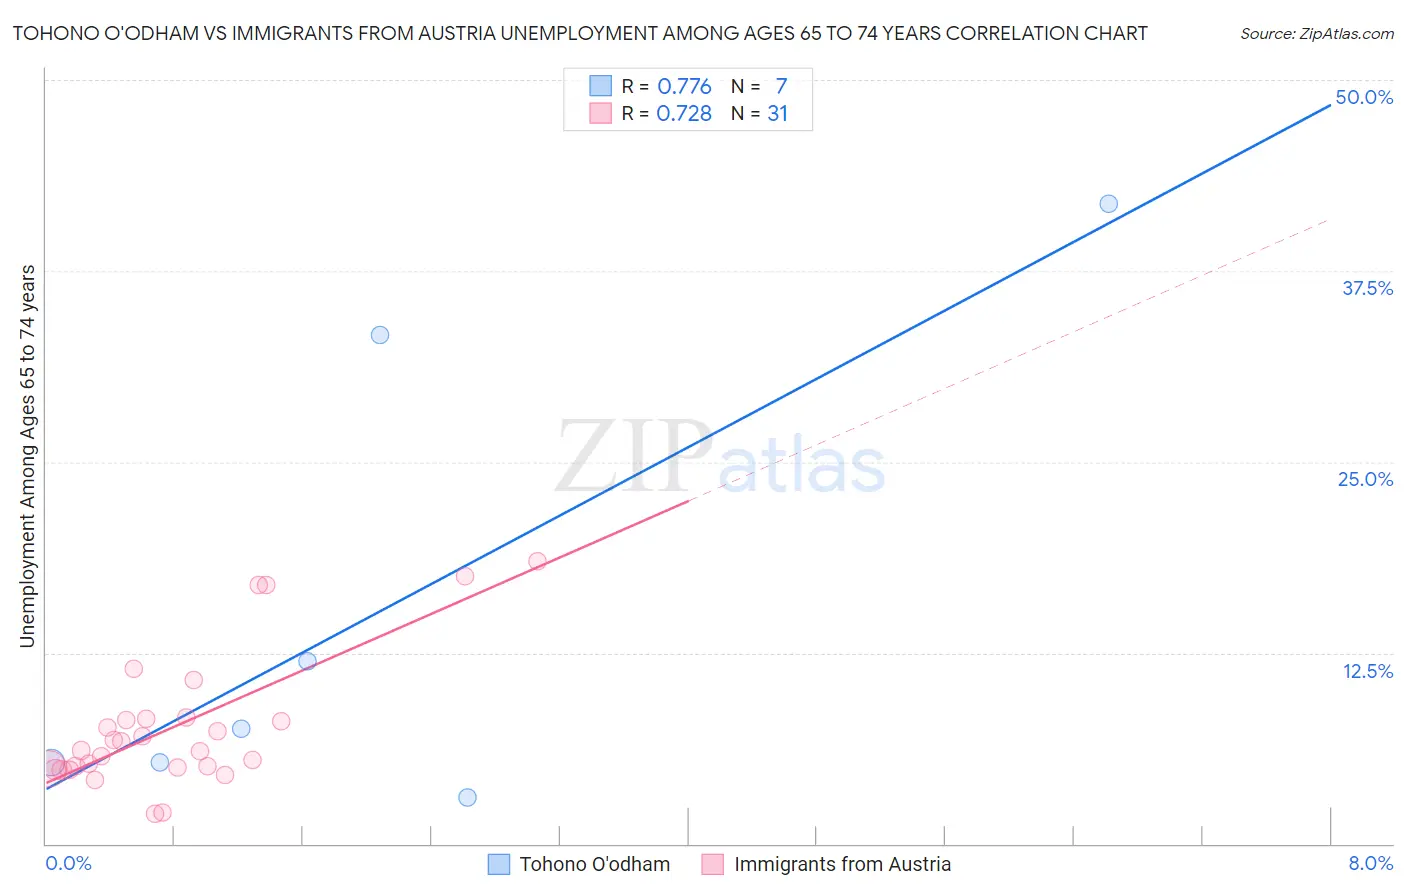 Tohono O'odham vs Immigrants from Austria Unemployment Among Ages 65 to 74 years